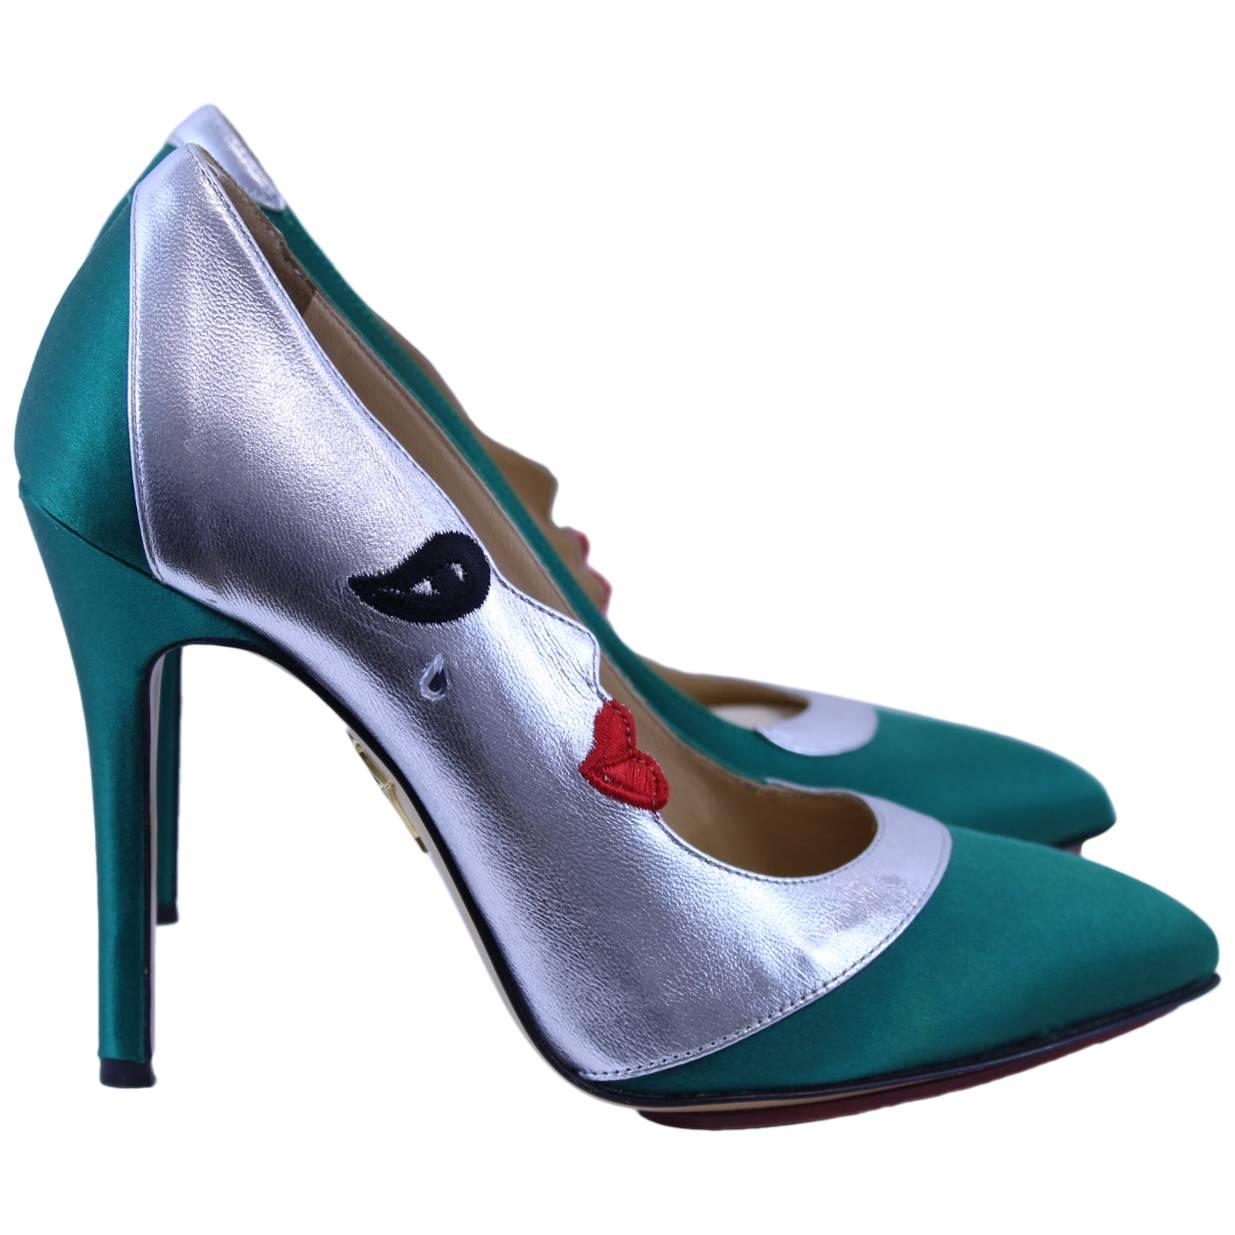 Charlotte Olympia Moon Shoes in Green Silk and Leather S.36